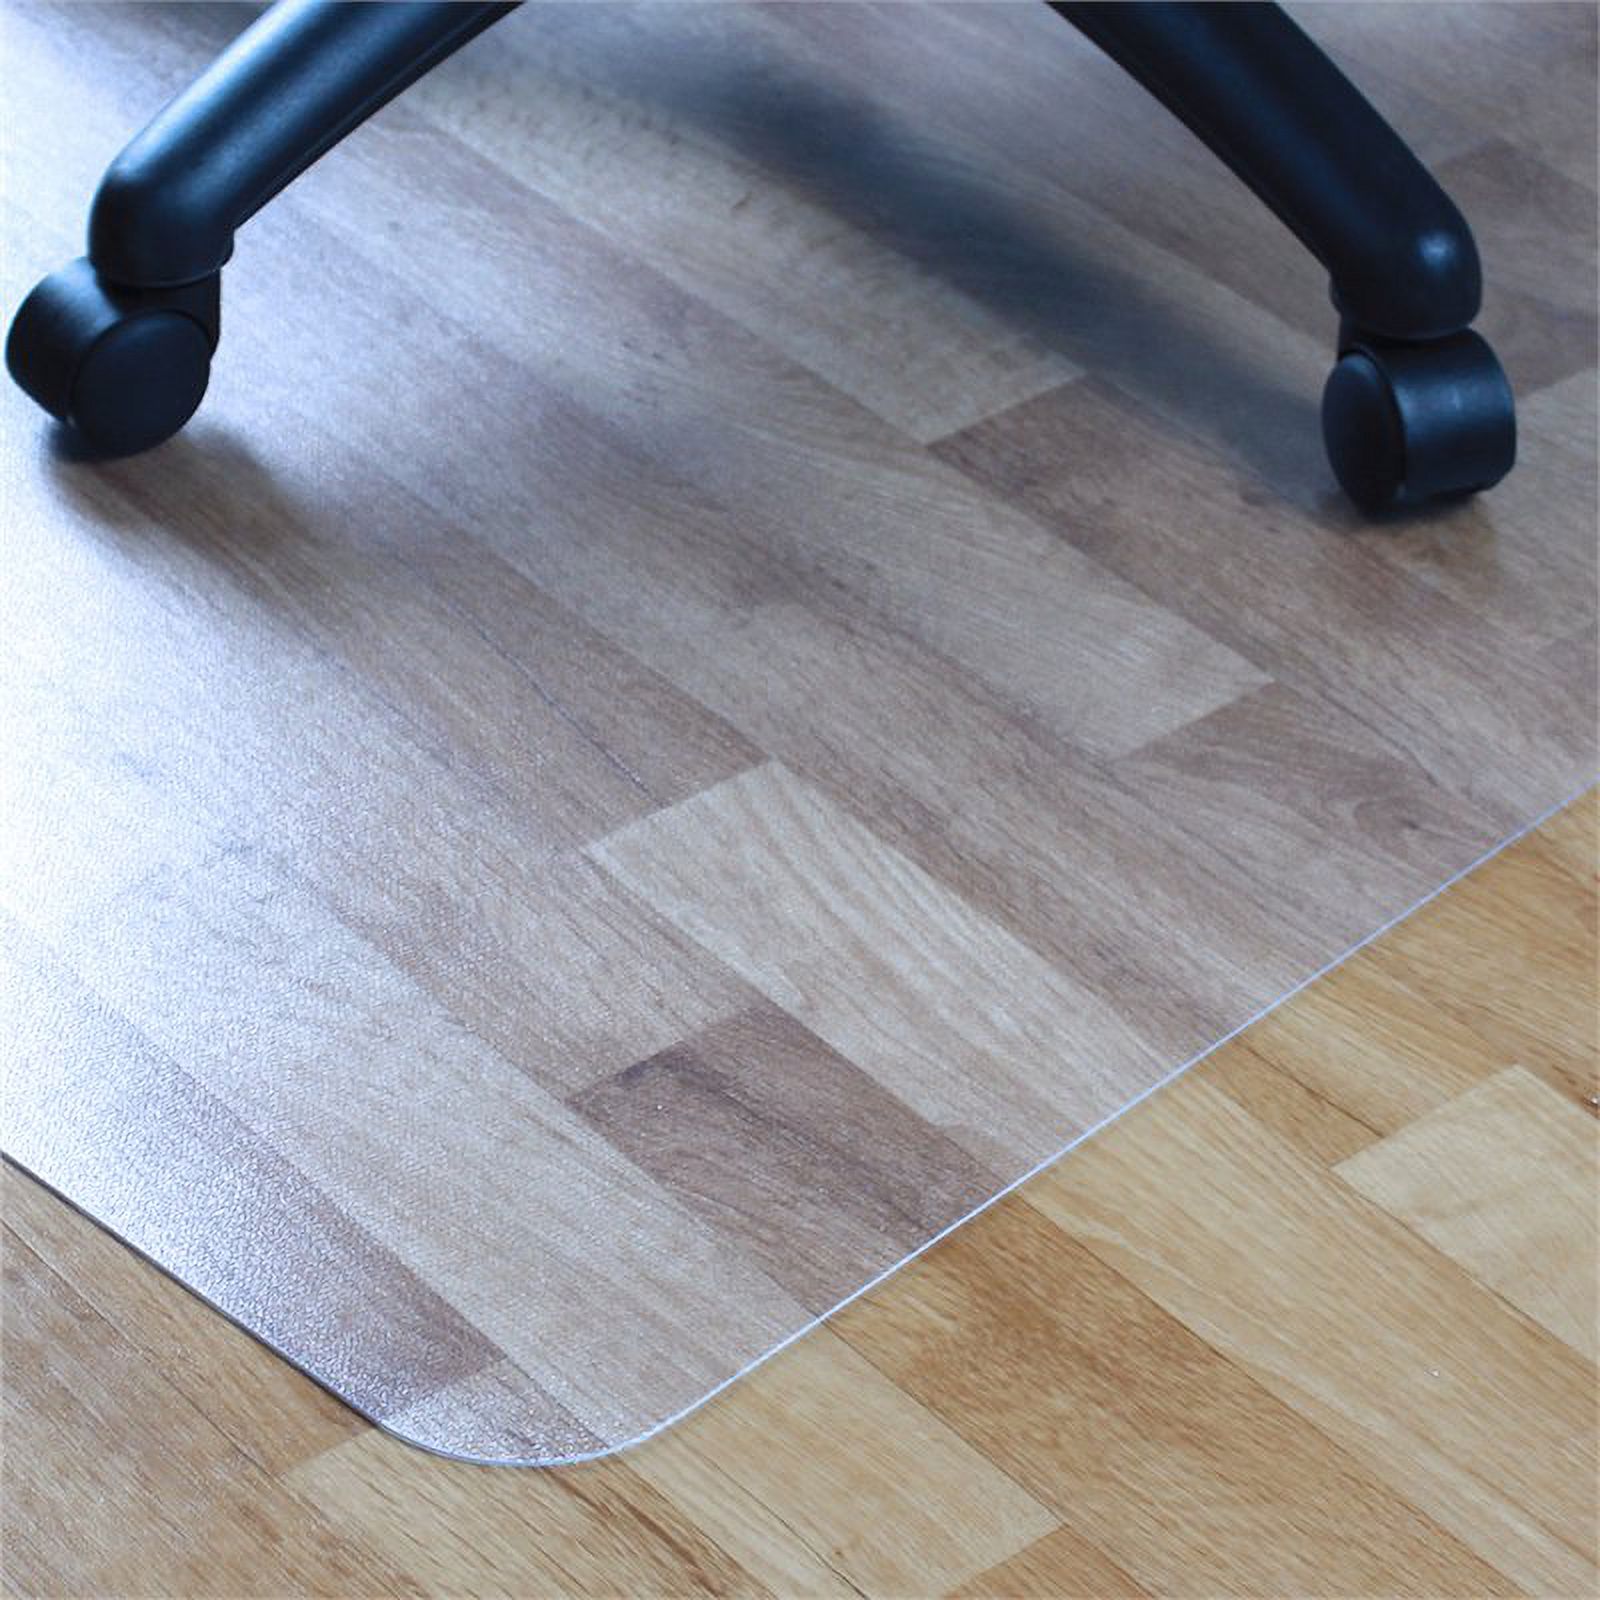 Ultimat® XXL Polycarbonate Square Chair Mat for Hard Floors - 60" x 60" - image 4 of 9